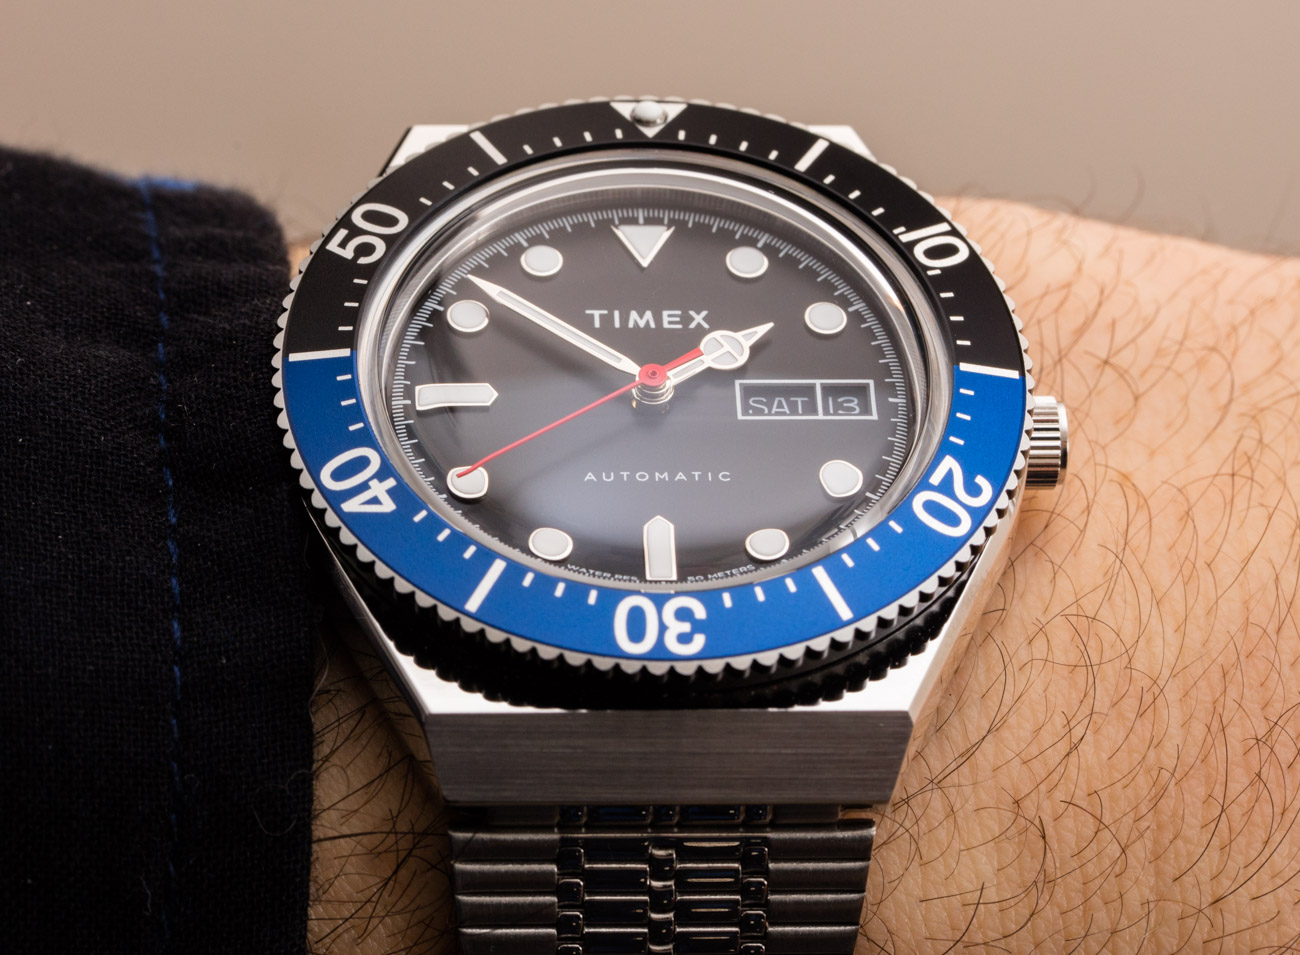 Timex M79 Automatic Watch Hands-On: Retro Looks, Budget Price